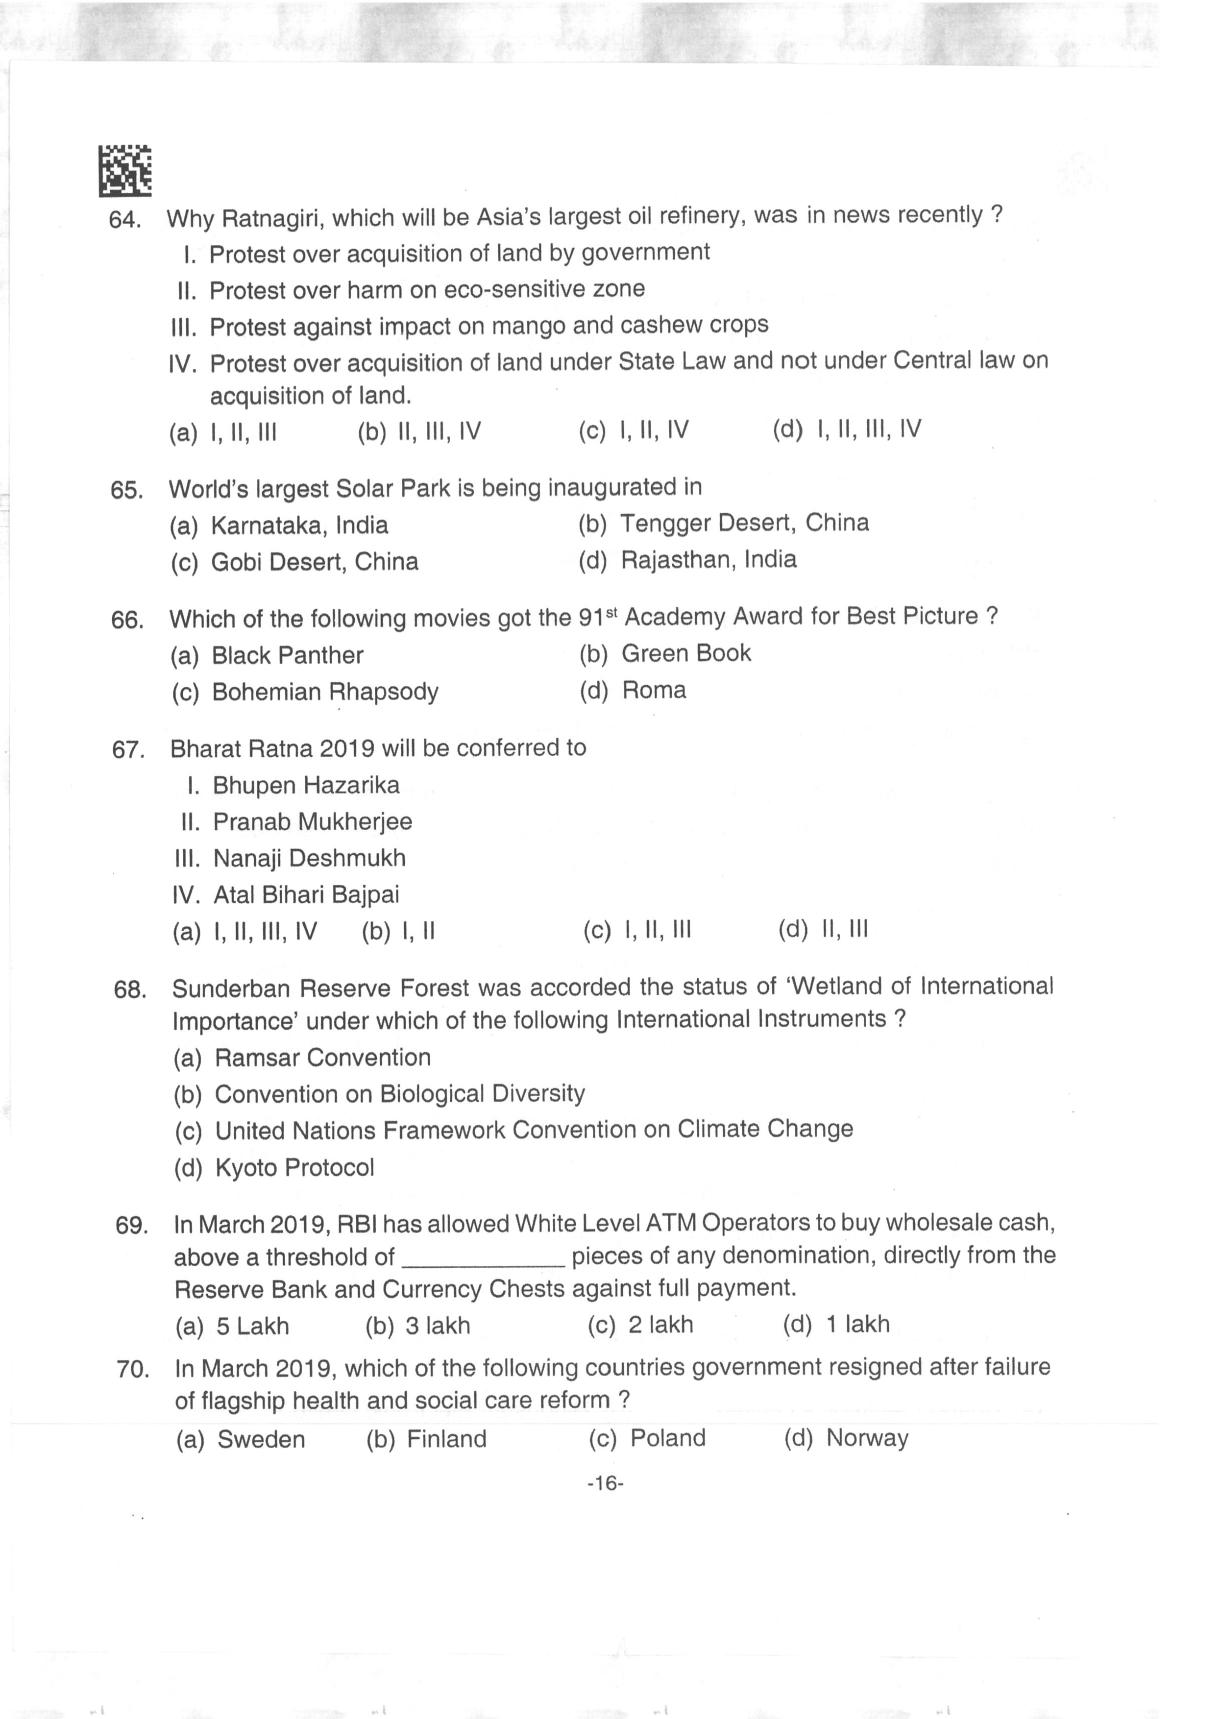 AILET 2019 Question Paper for BA LLB - Page 16